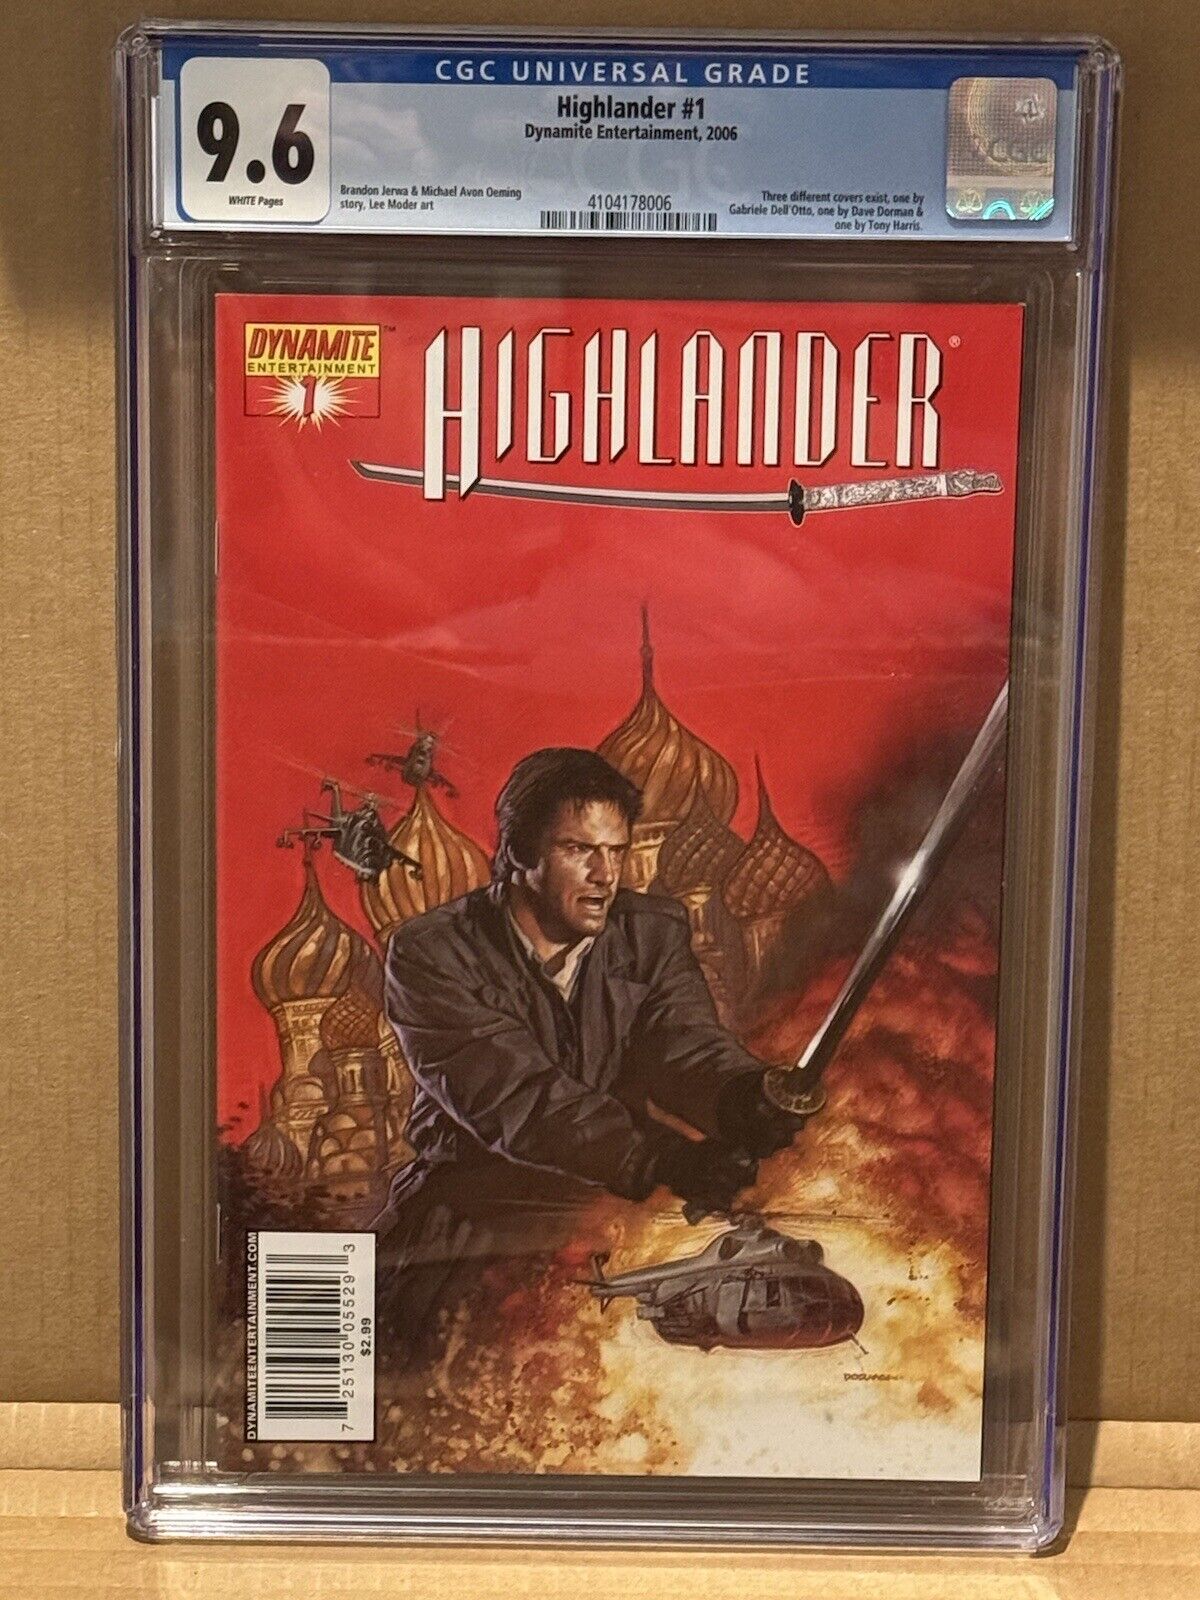 Highlander #1, CGC 9.6, Dynamite Entertainment, 2006 White Pages